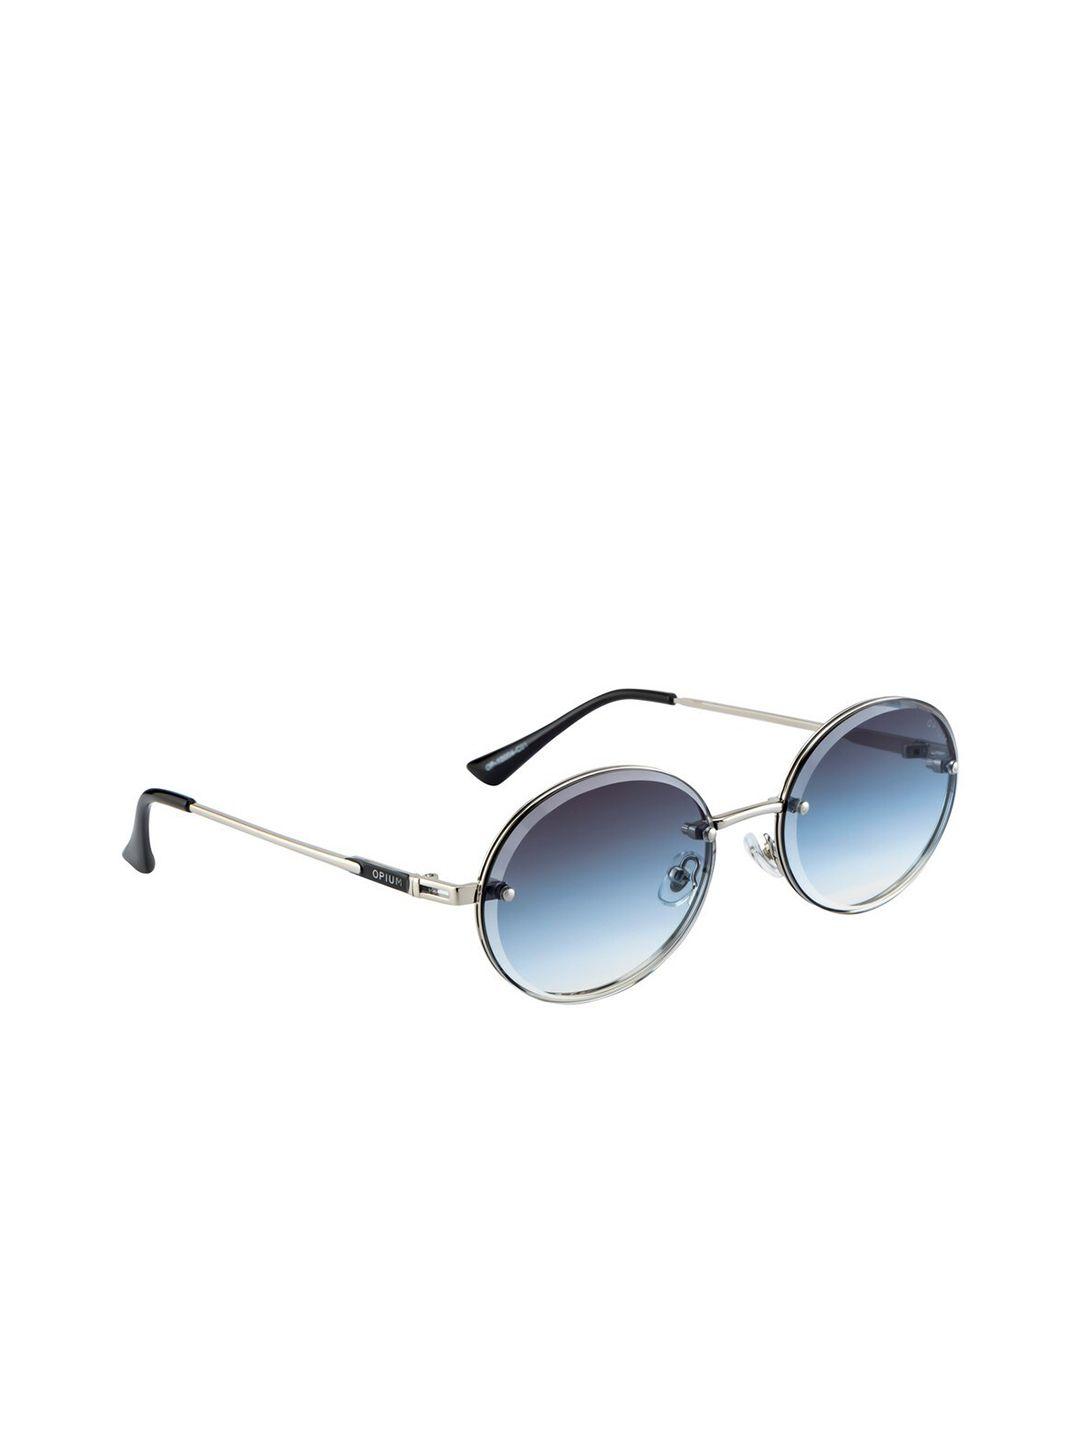 opium women blue round sunglasses with uv protected lens op-10004-c01